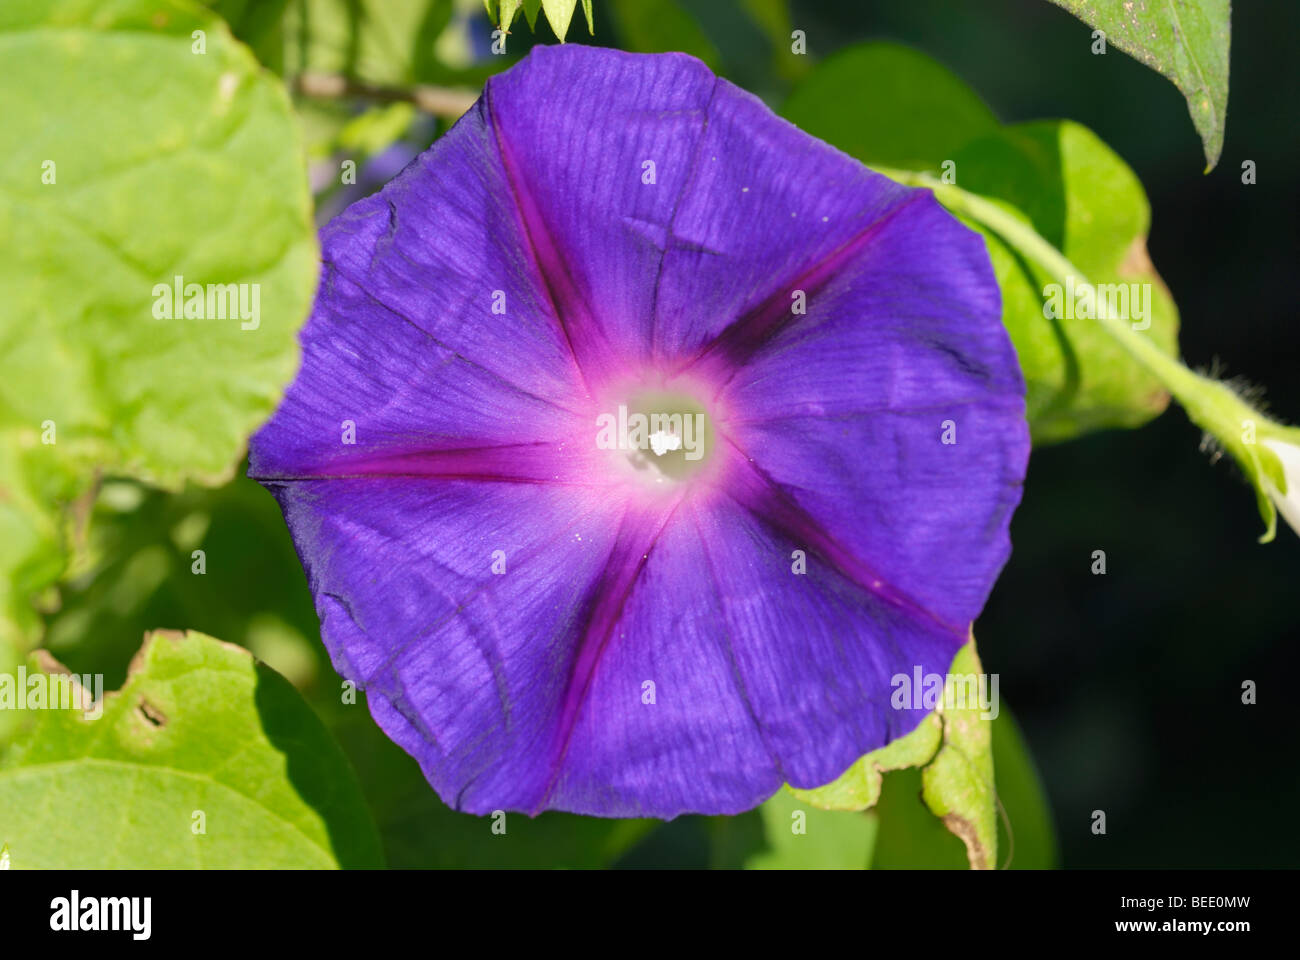 Purple flower of an Ipomoea, Morning Glory (Ipomoea tricolor sp.) Stock Photo